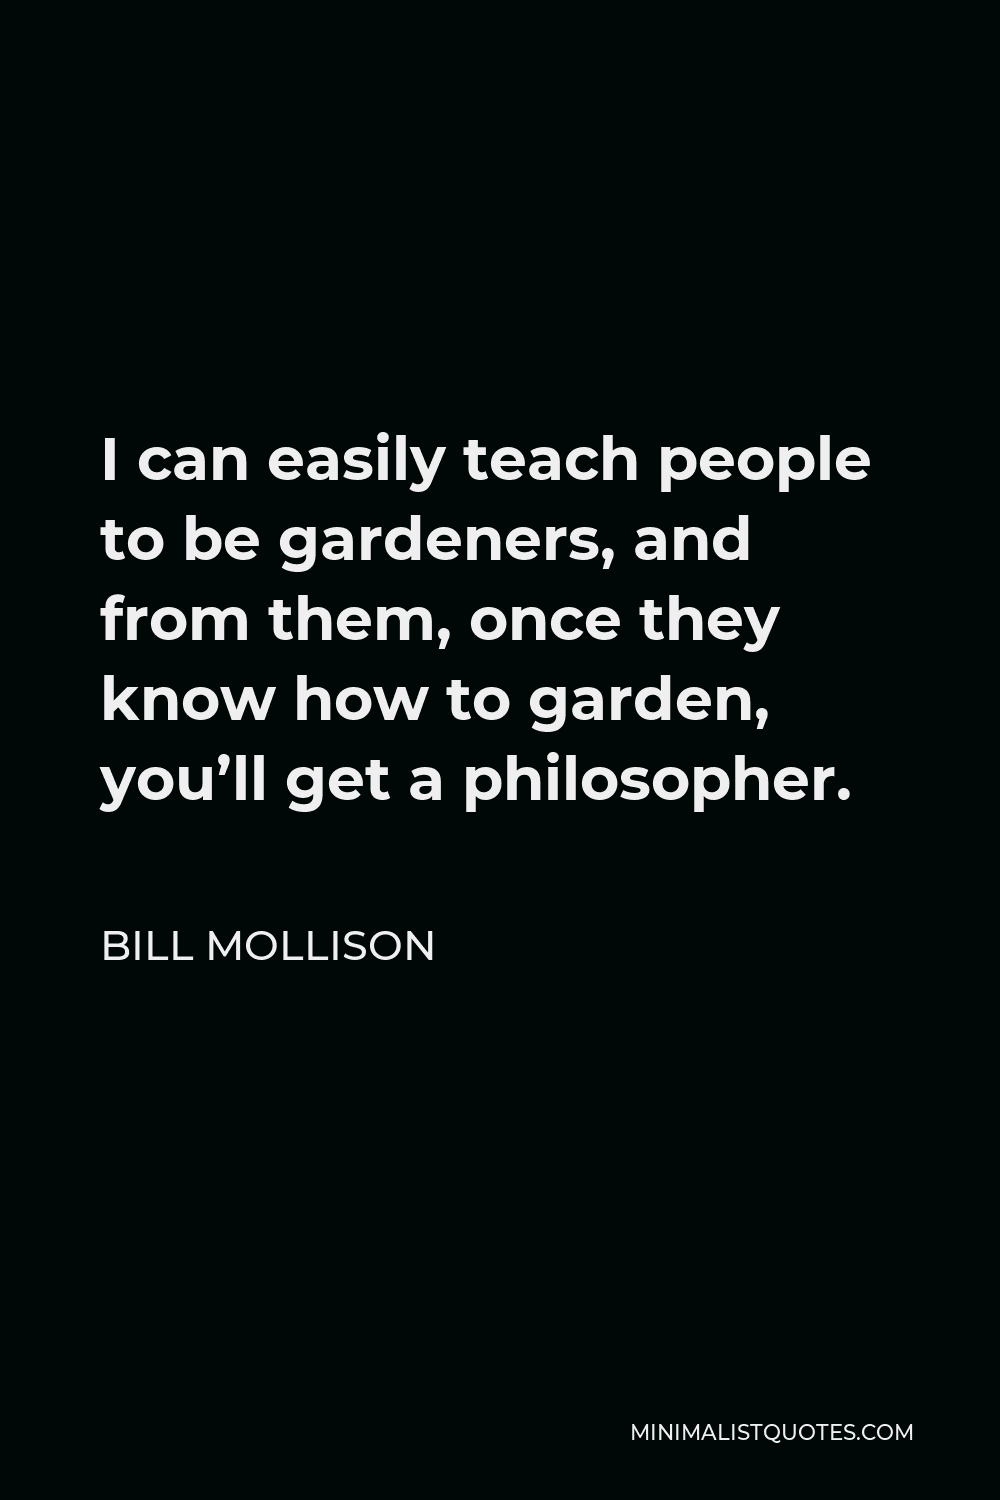 Bill Mollison Quote - I can easily teach people to be gardeners, and from them, once they know how to garden, you’ll get a philosopher.